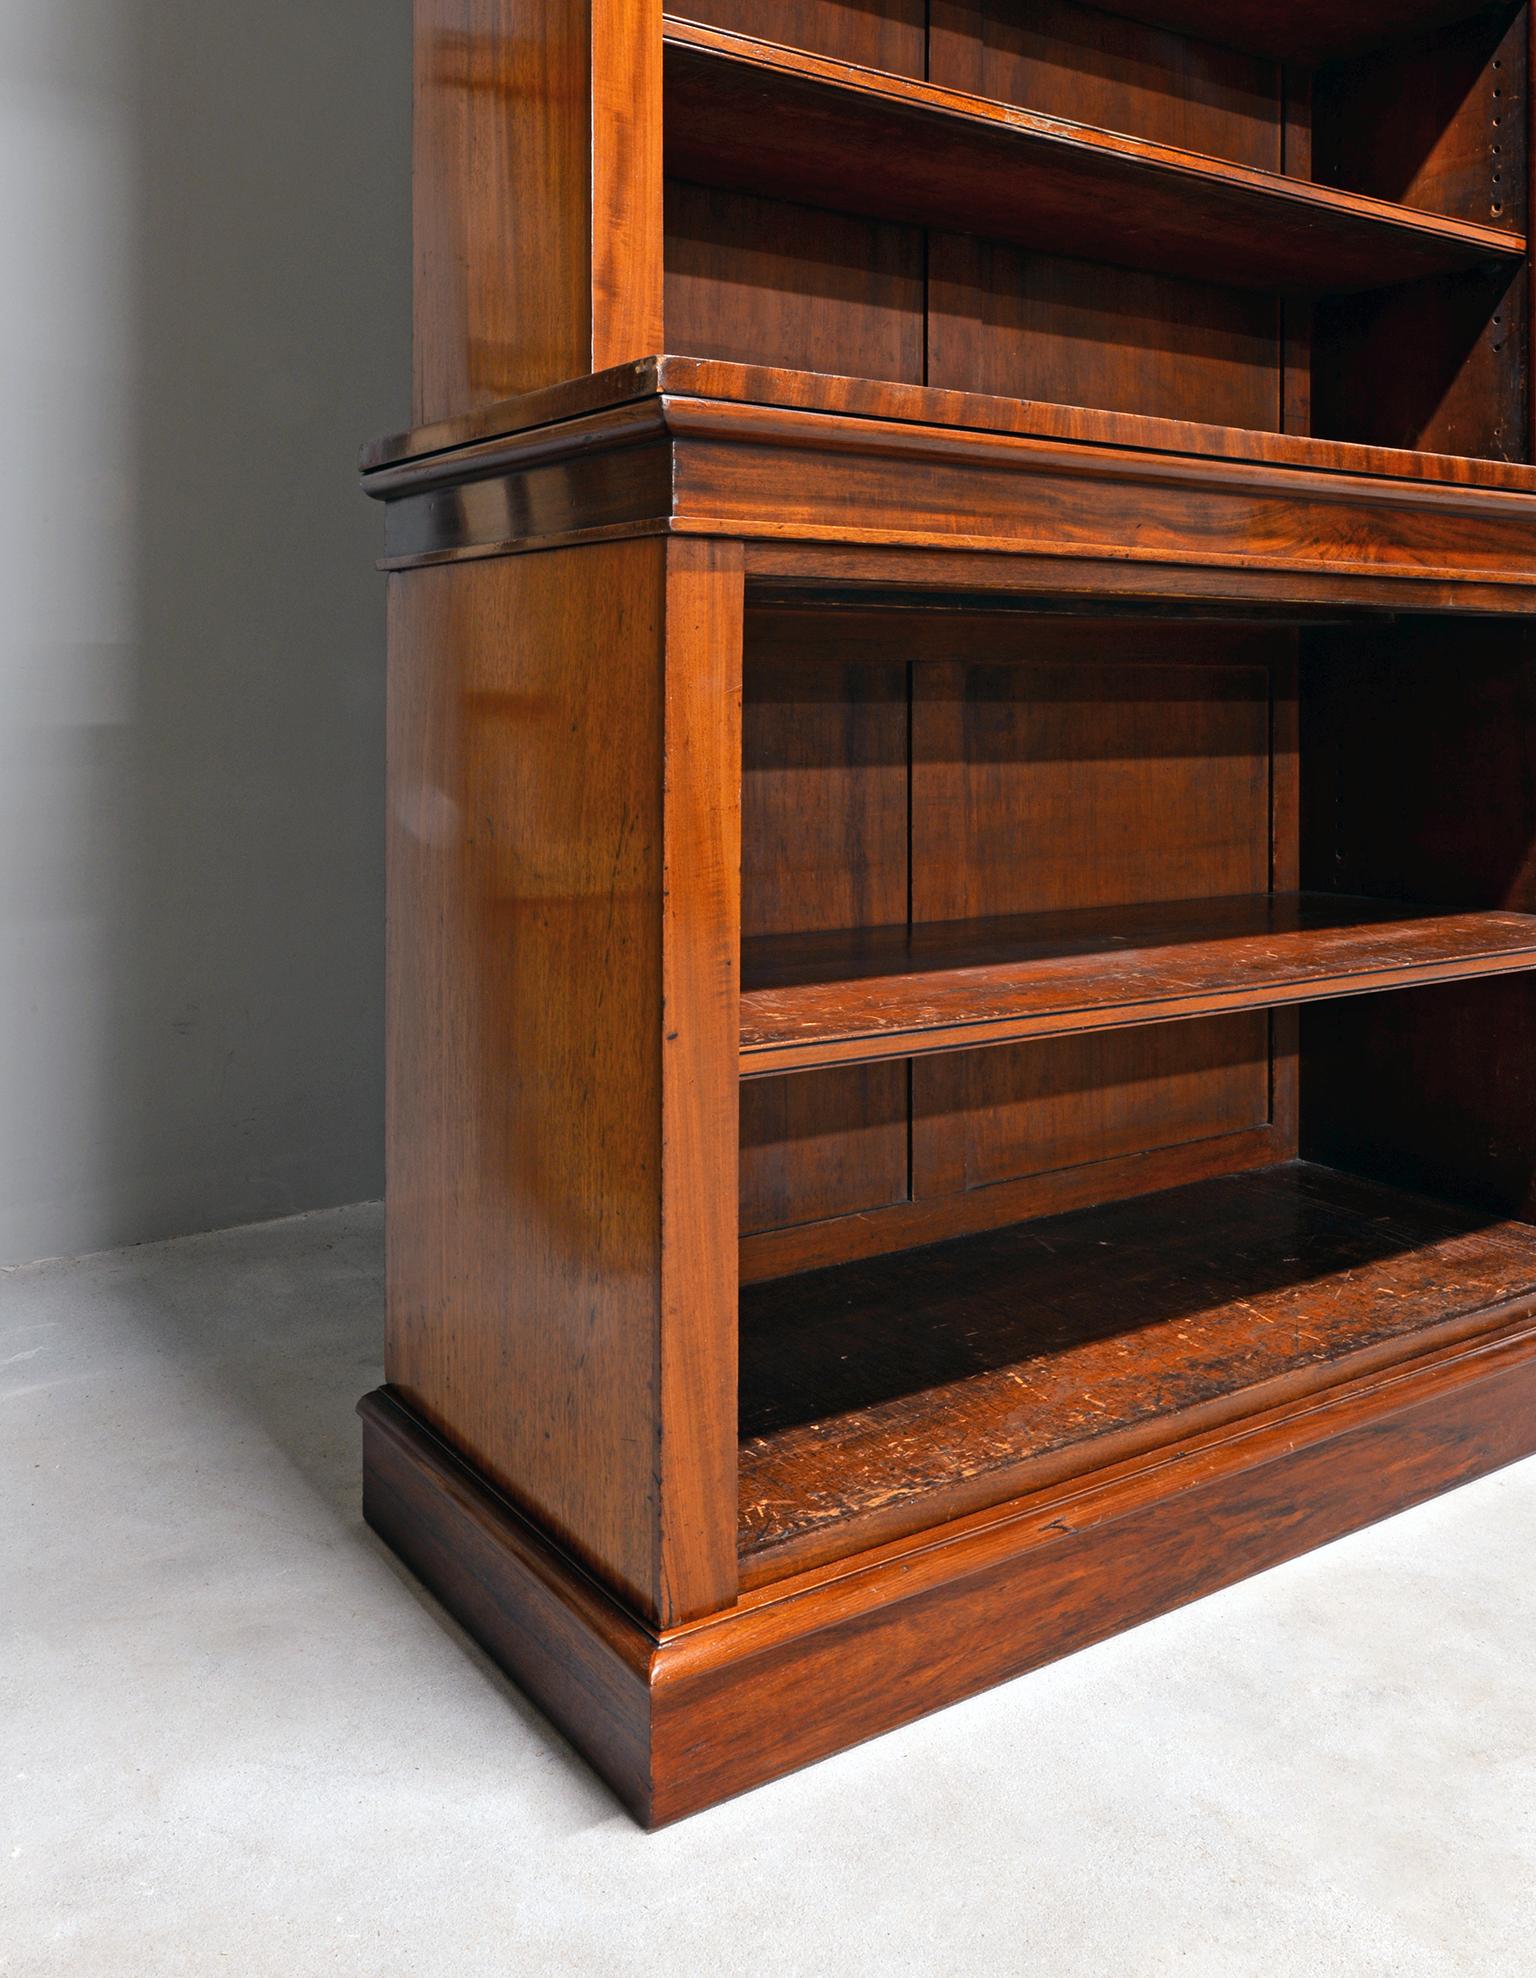 English Large Victorian Breakfront Open Bookcase in Four-Parts, Mahogany, c. 1860 For Sale